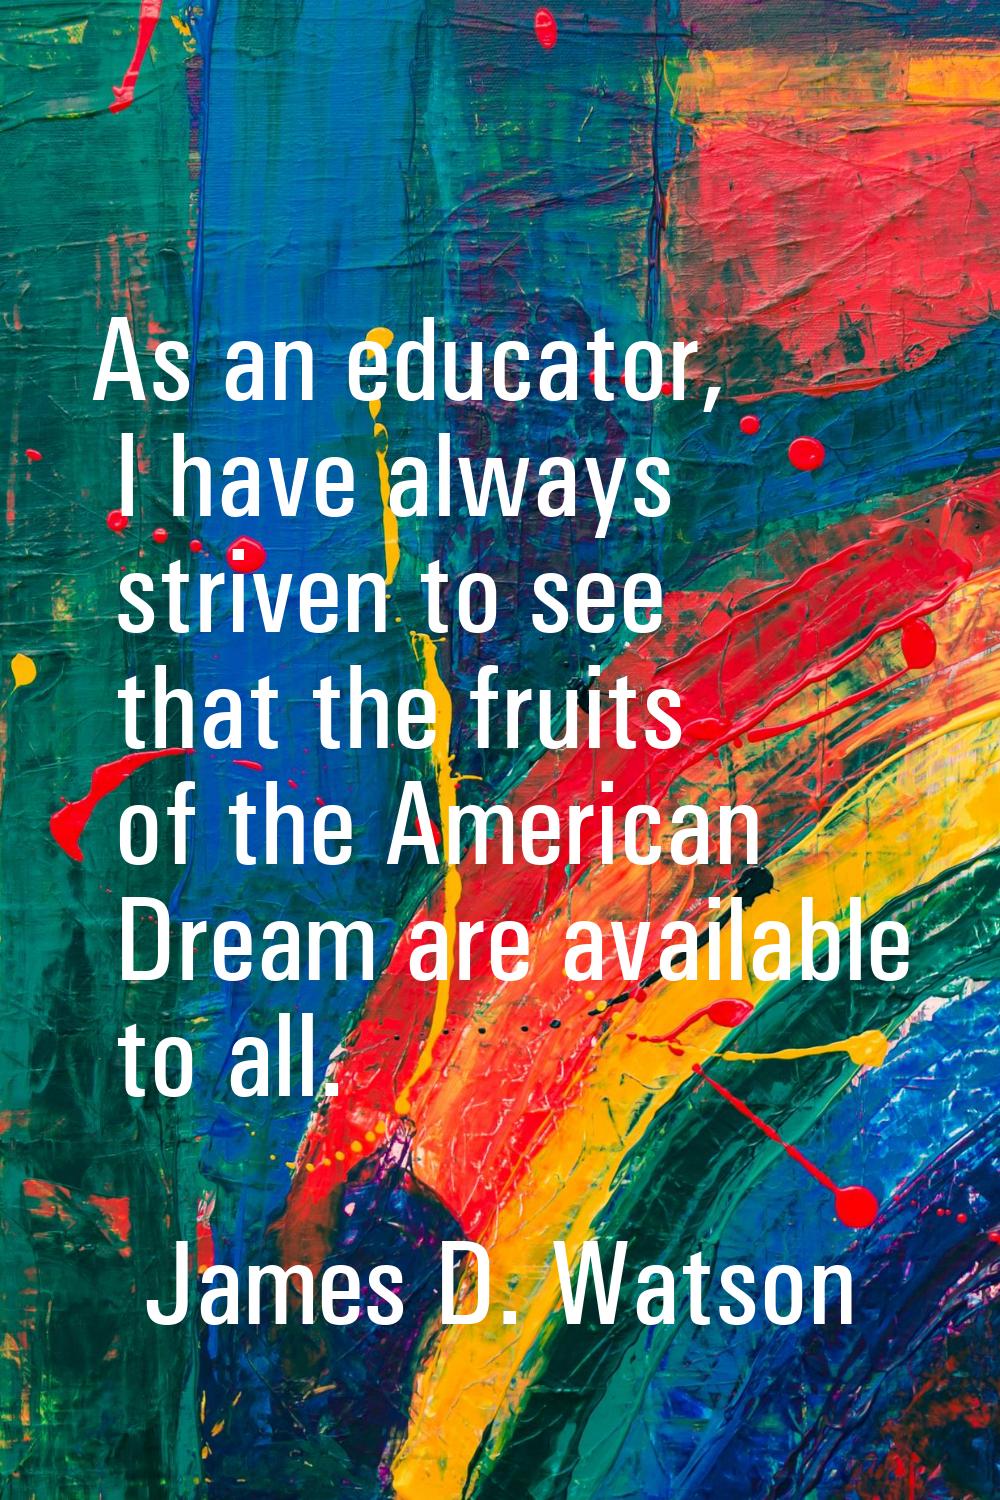 As an educator, I have always striven to see that the fruits of the American Dream are available to